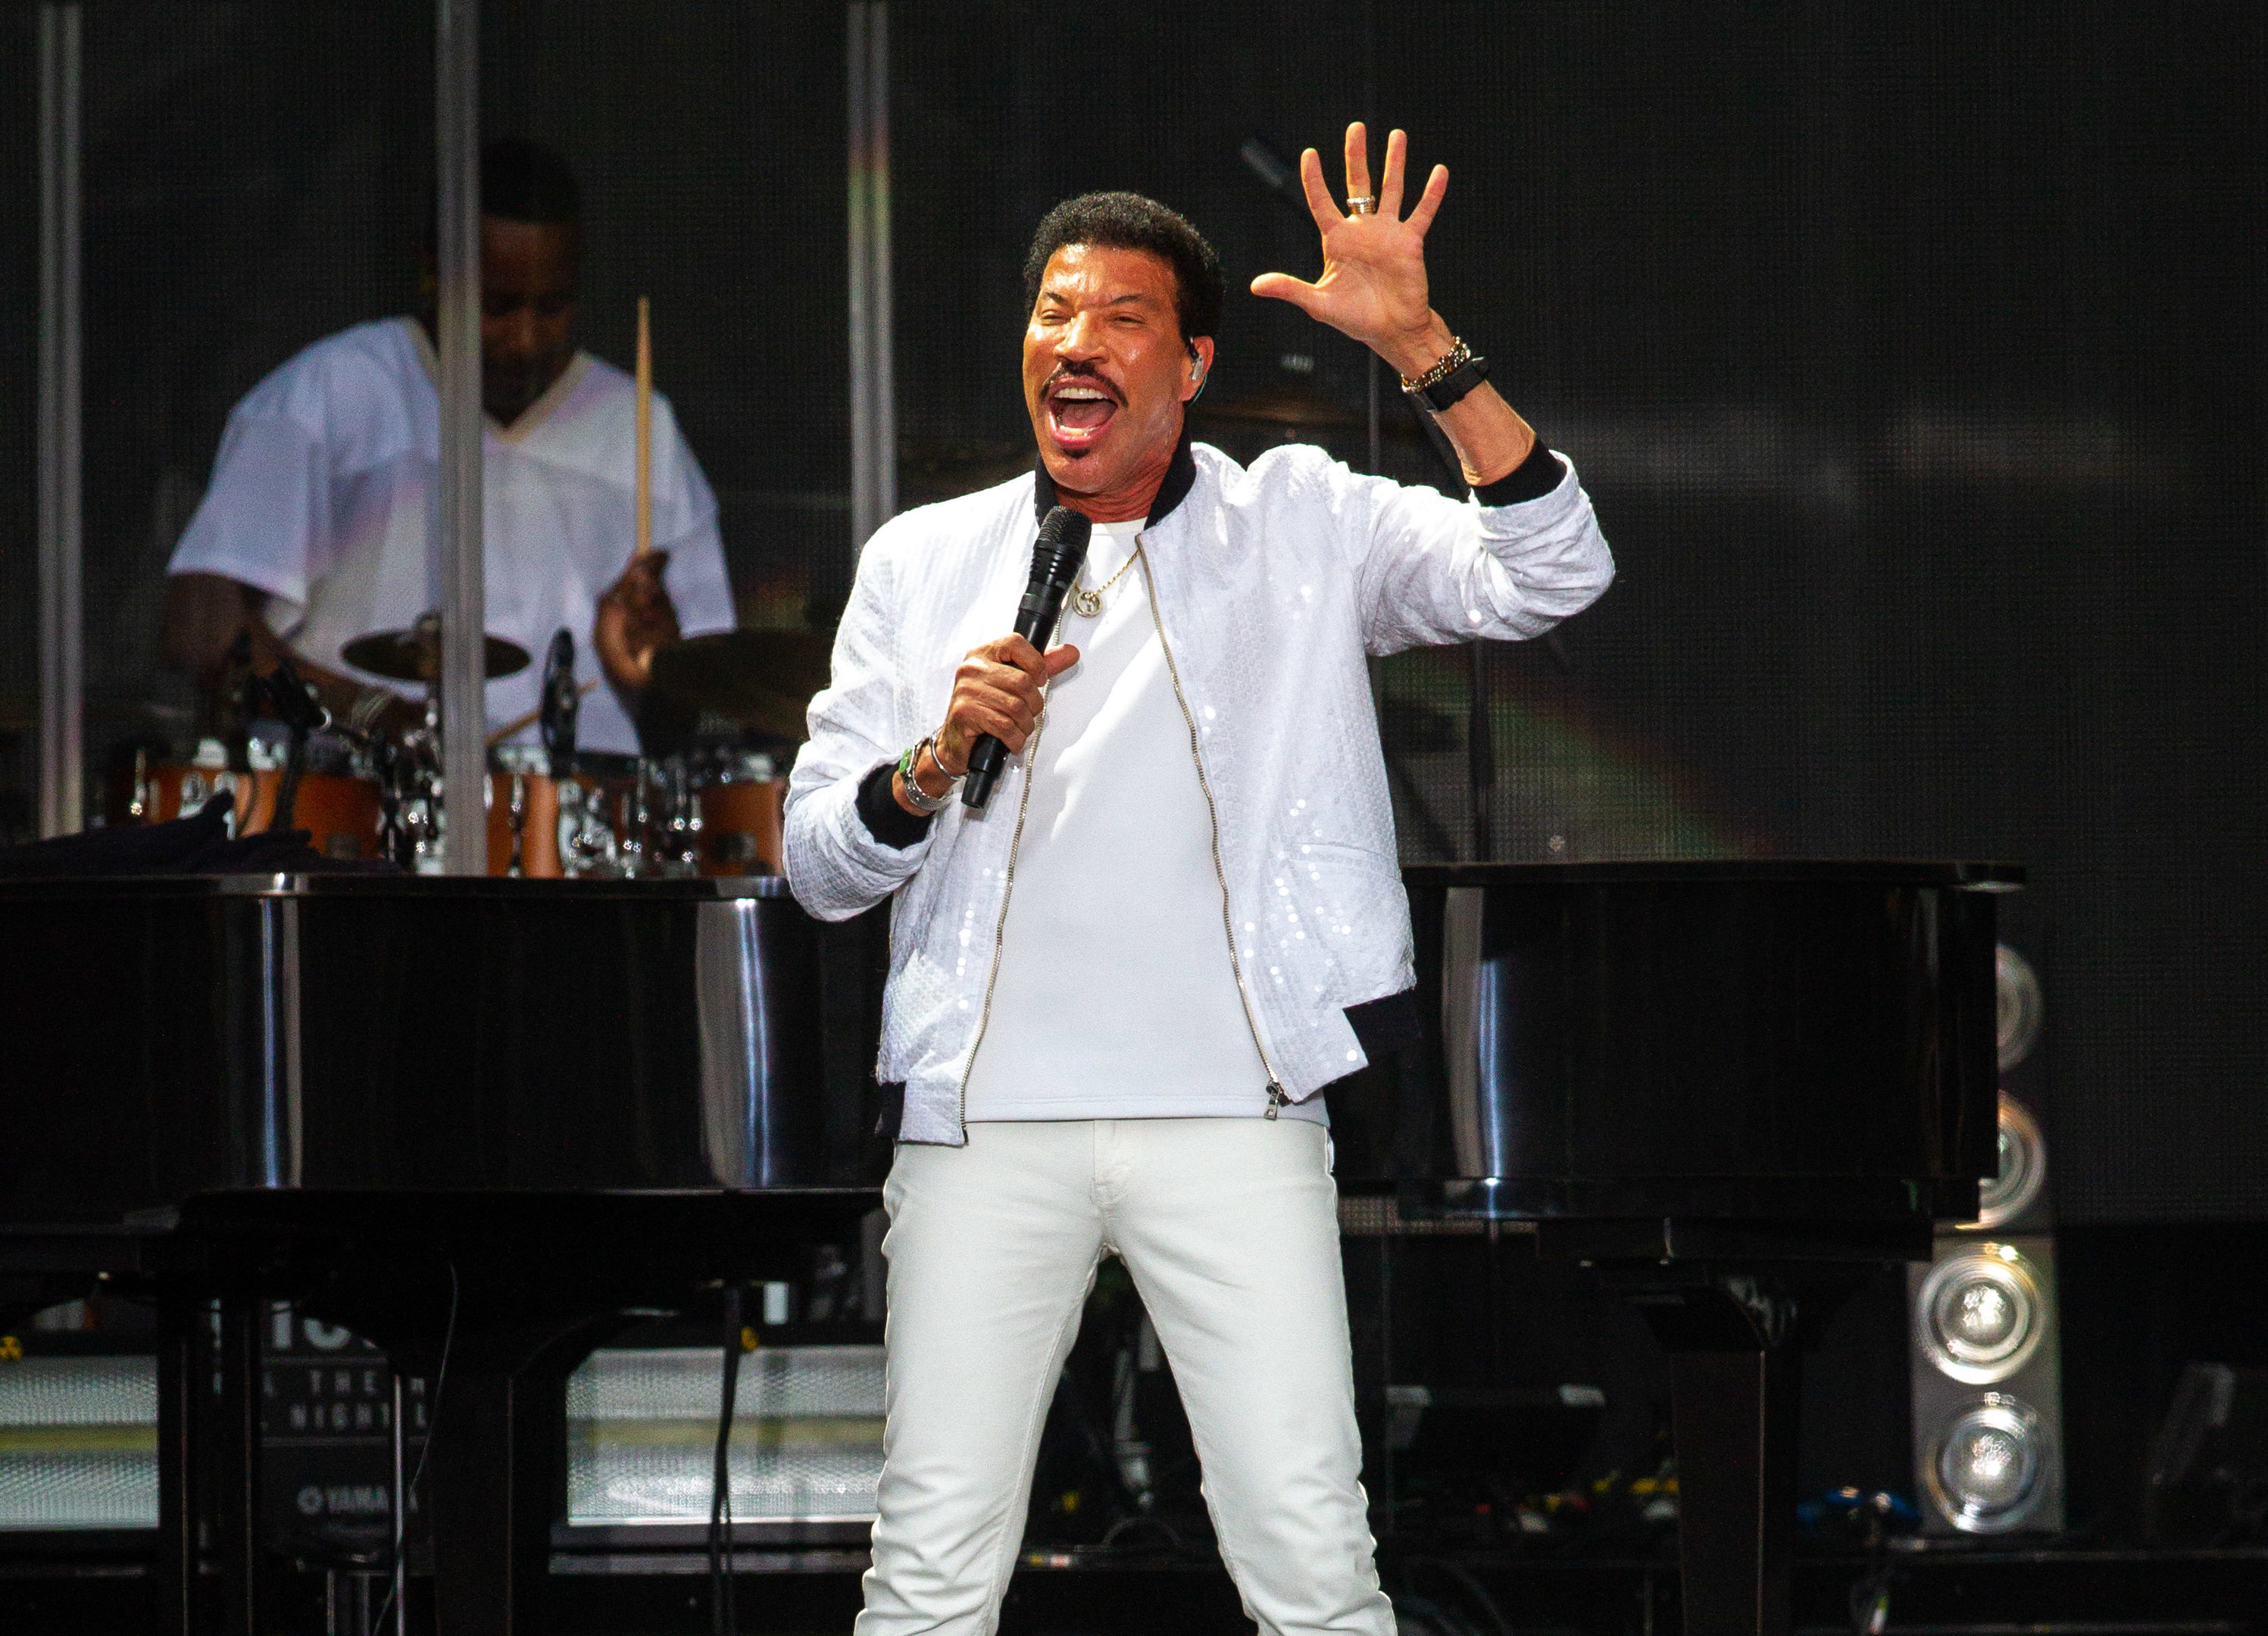 Lionel Ritchie preformed to a sold-out McDiarmid Park on Sunday.